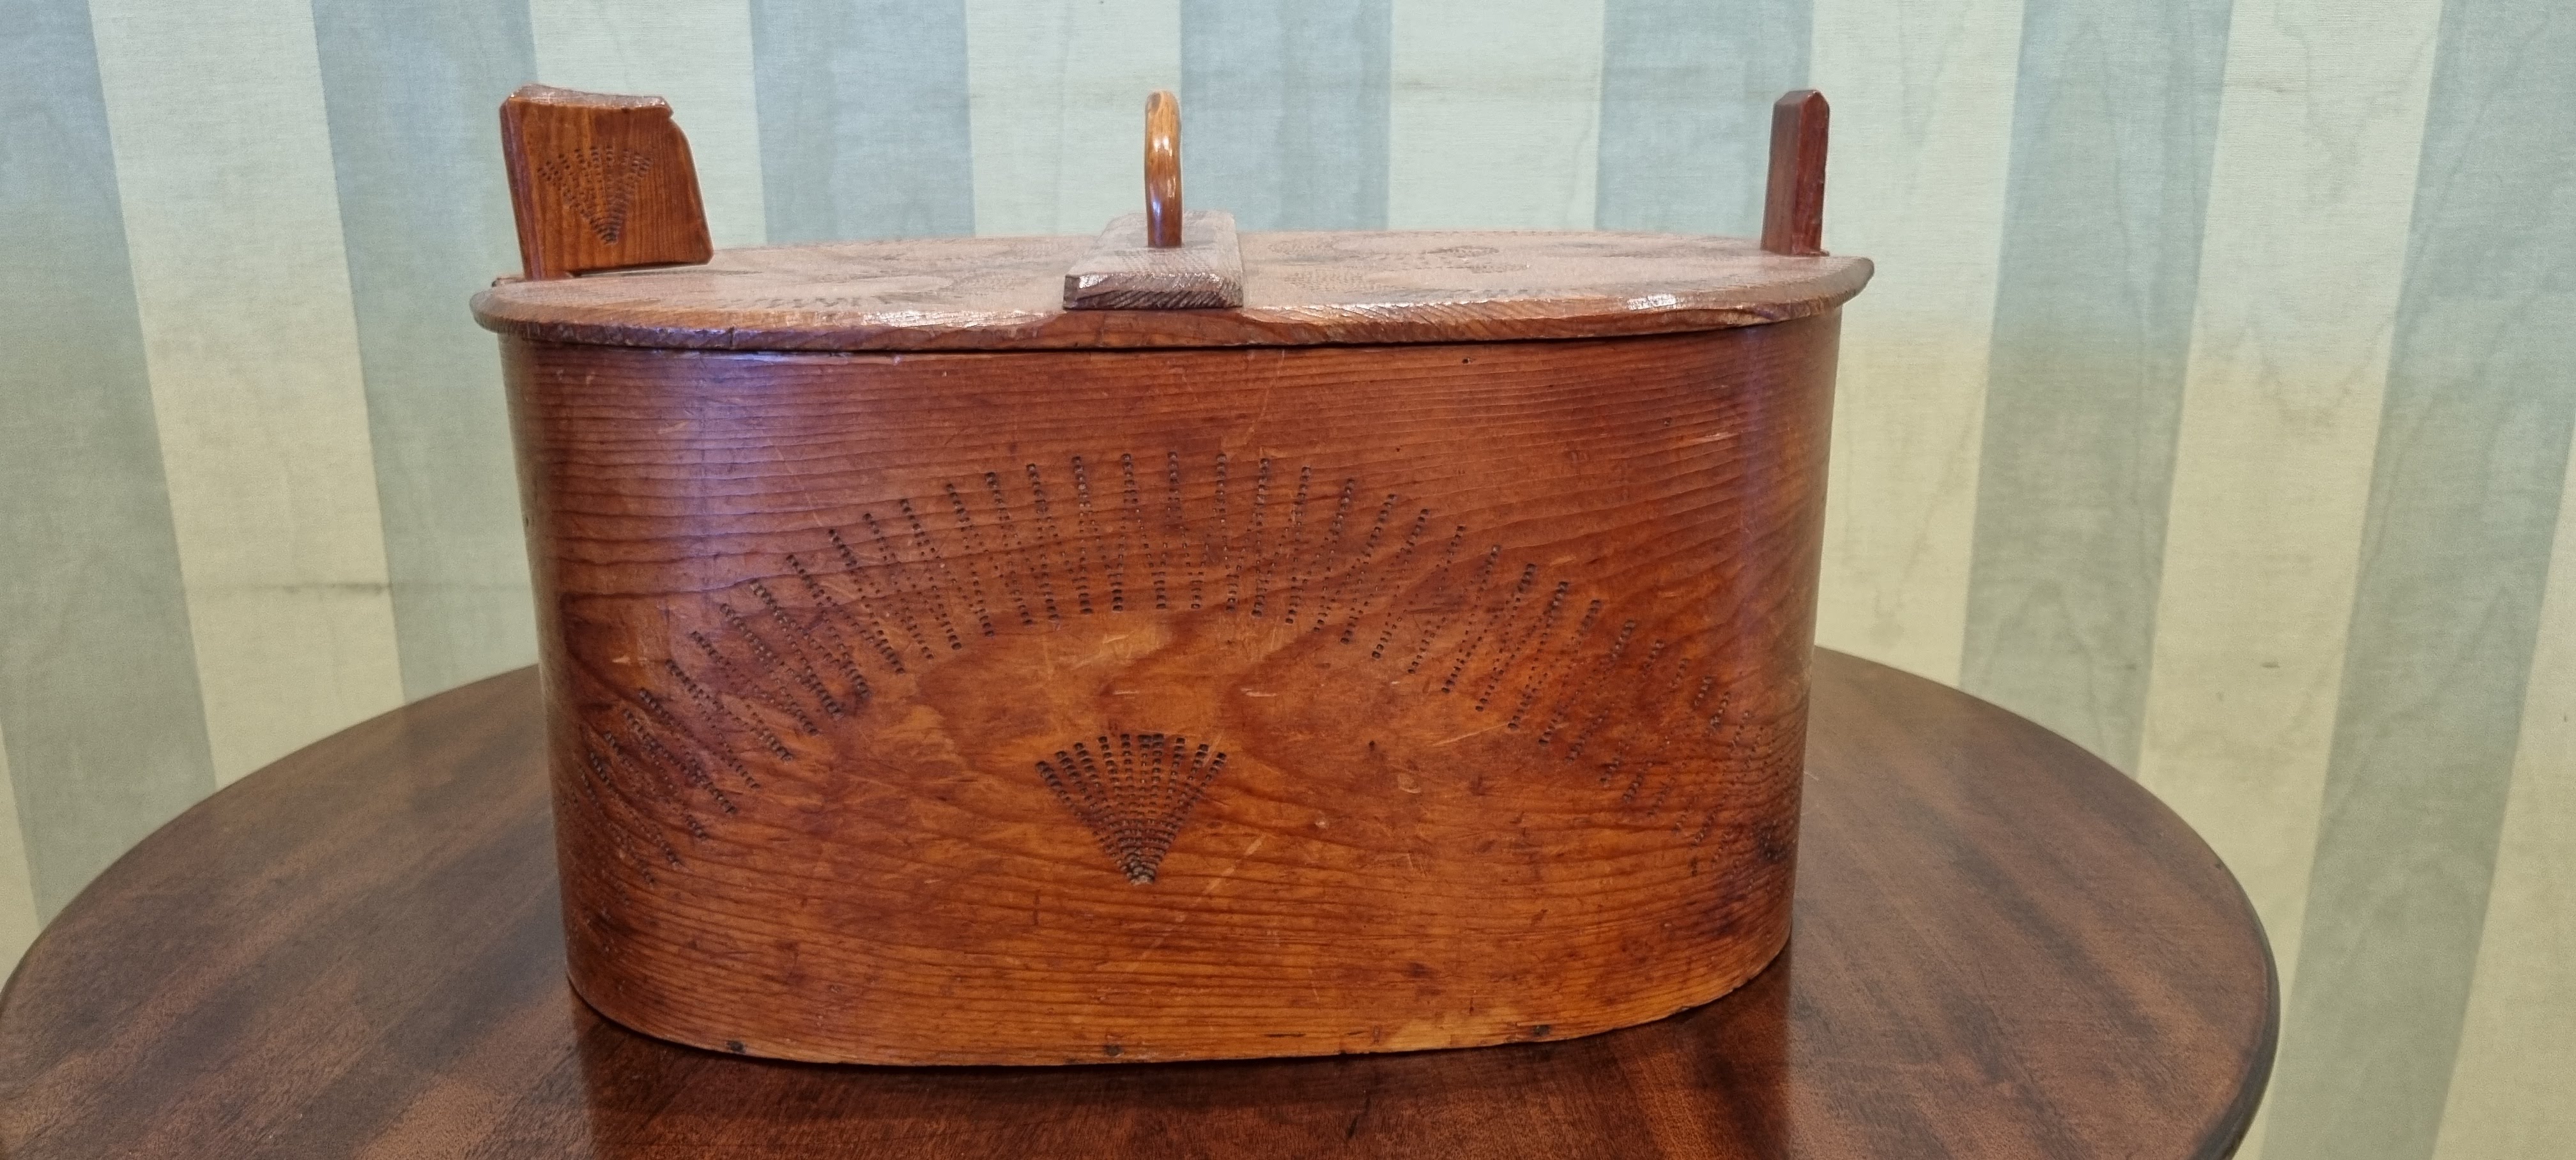 Wooden Container